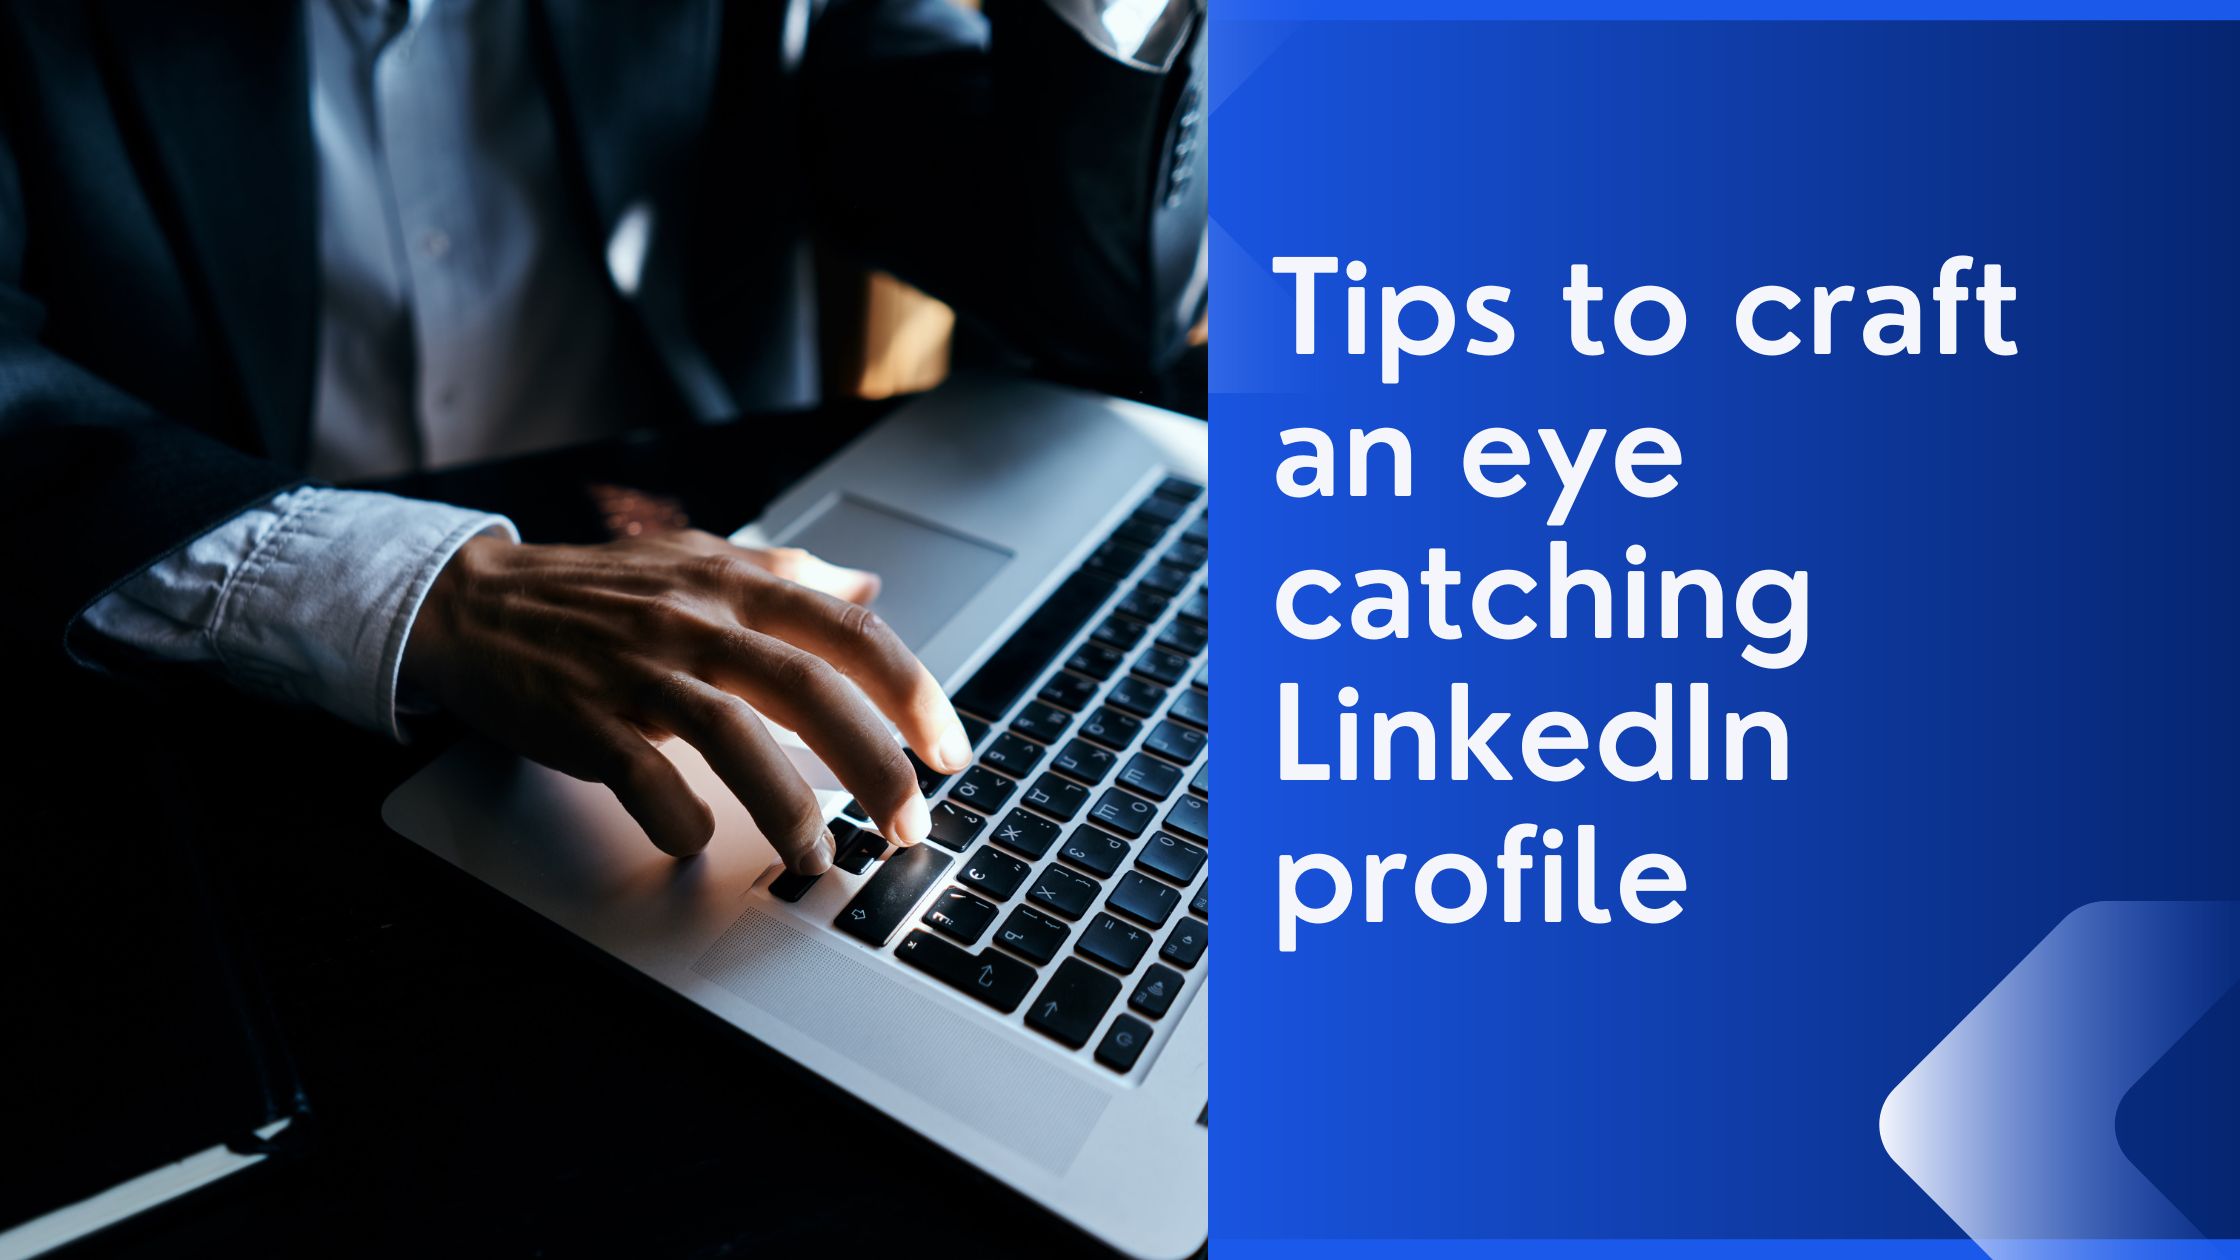 Tips to craft an eye catching LinkedIn profile